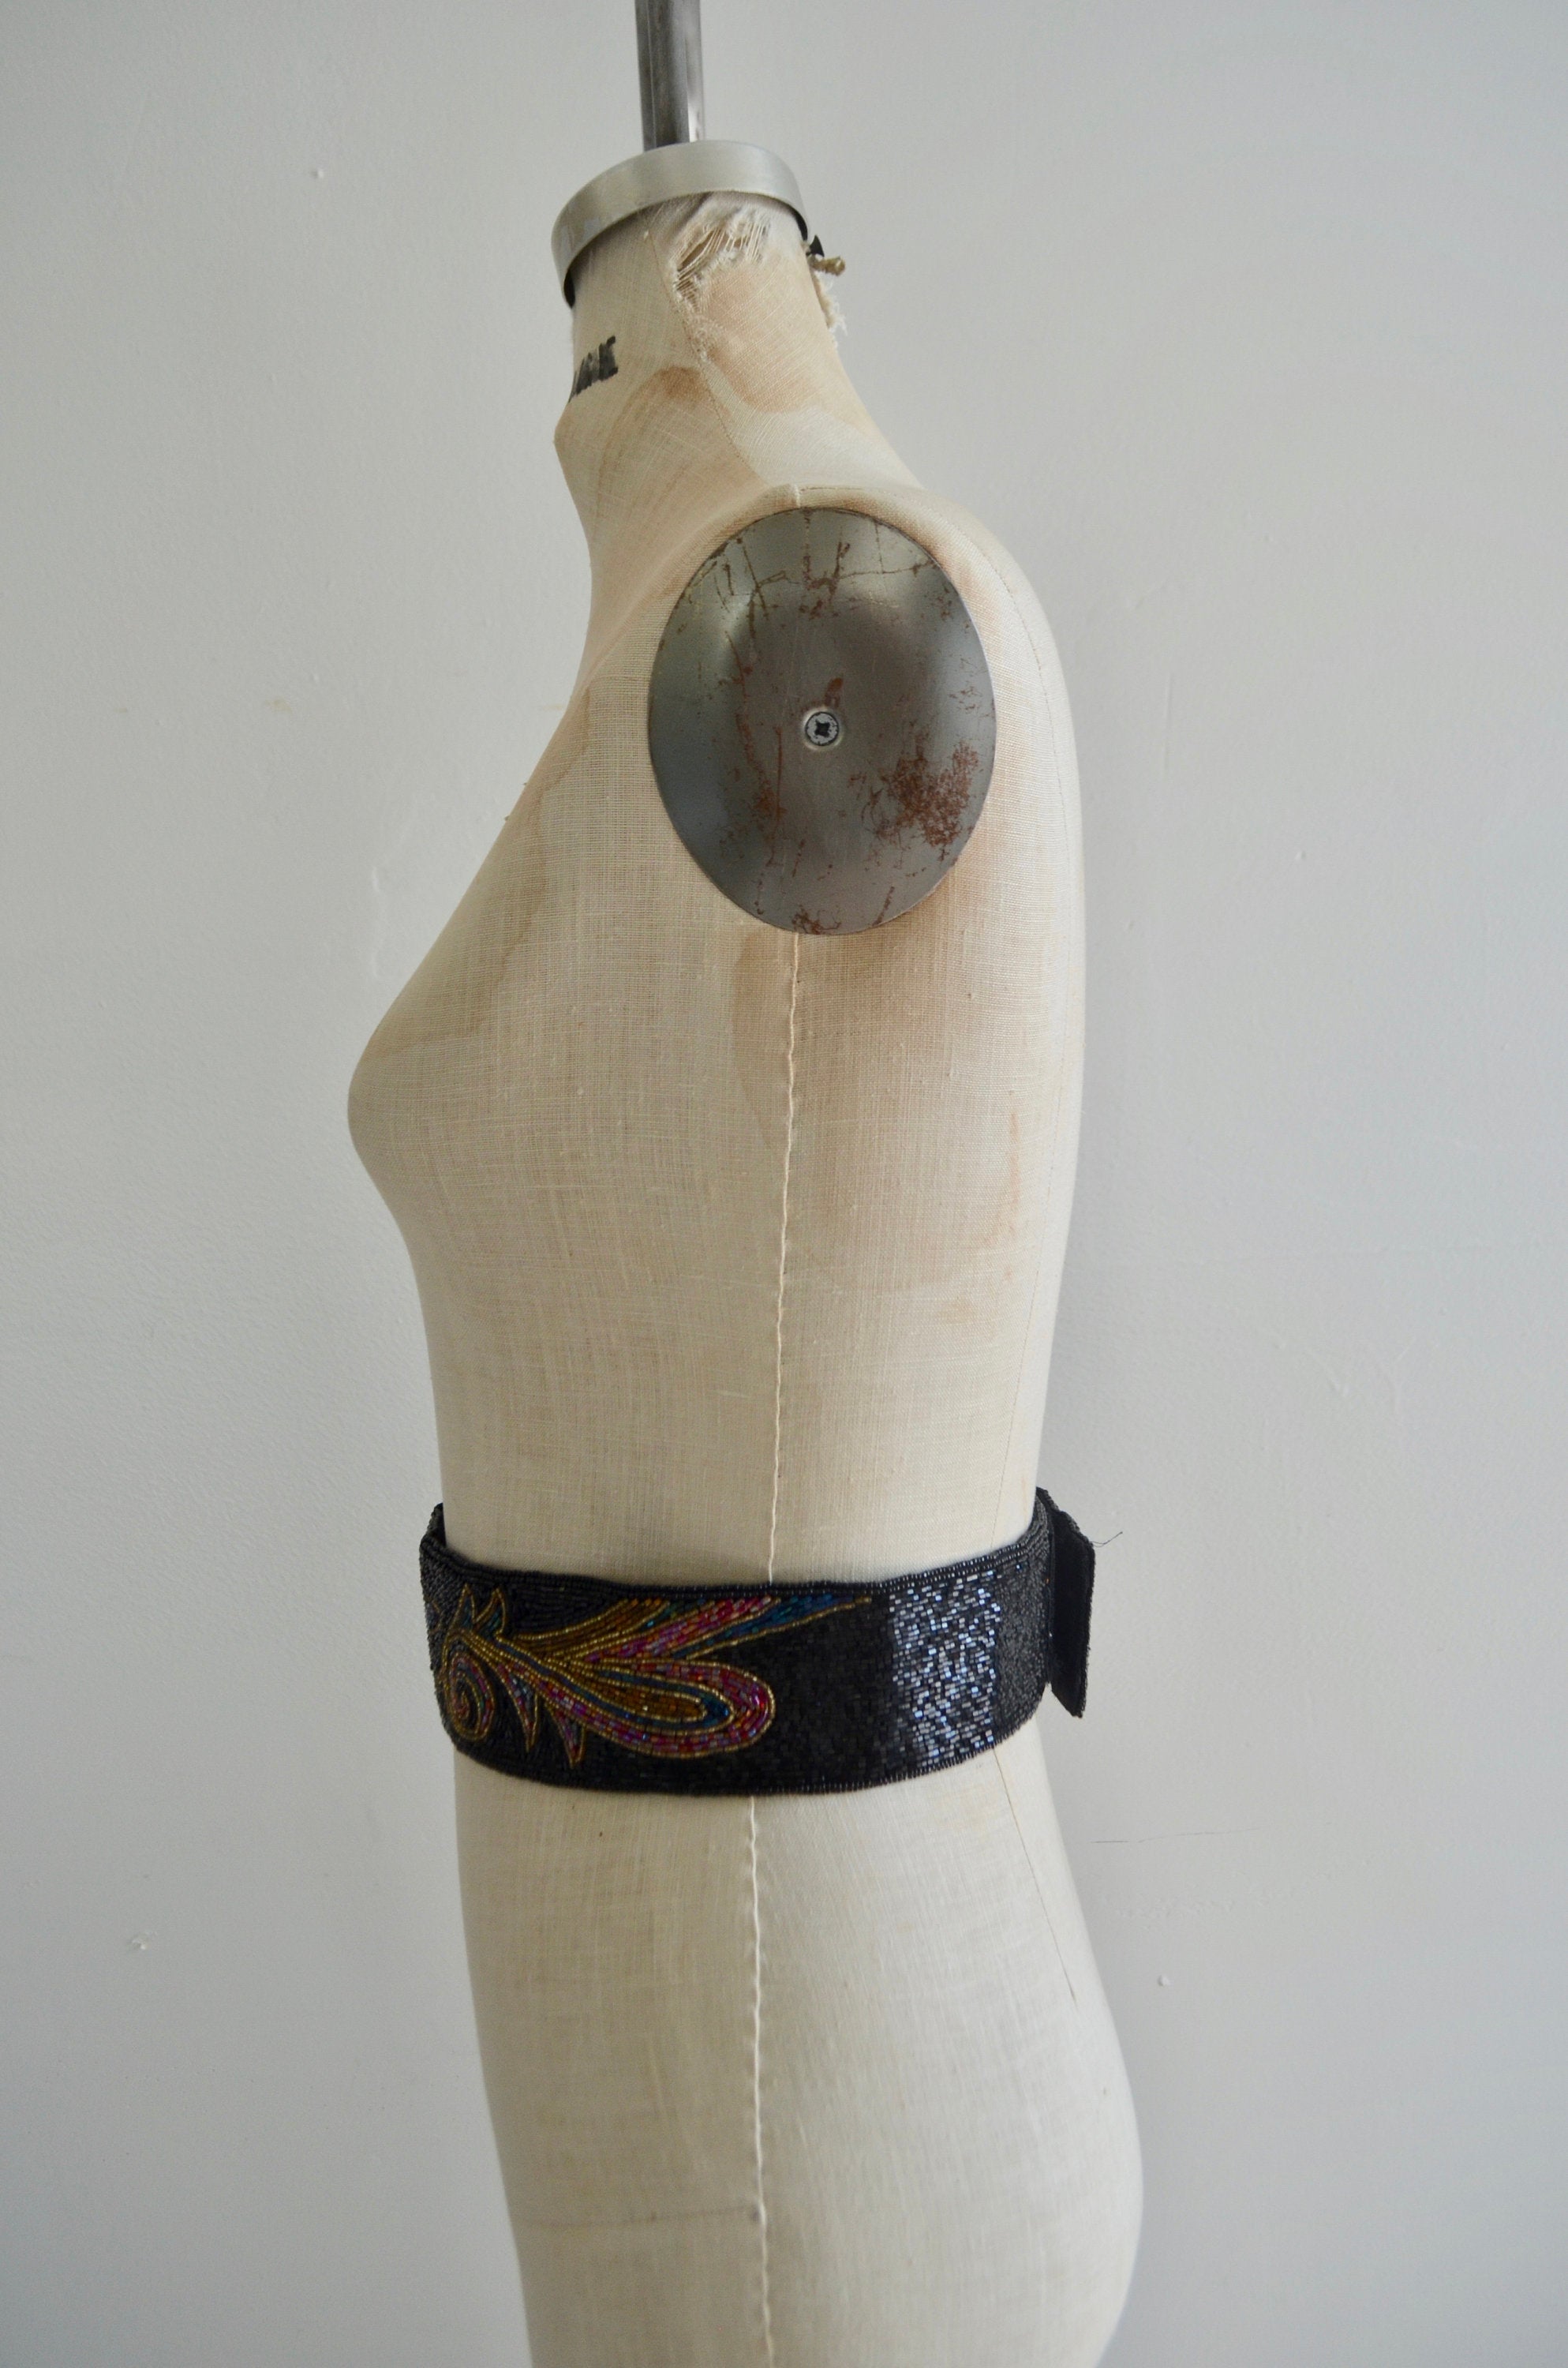 Black & Floral Multicolor Sequined And Beaded Belt